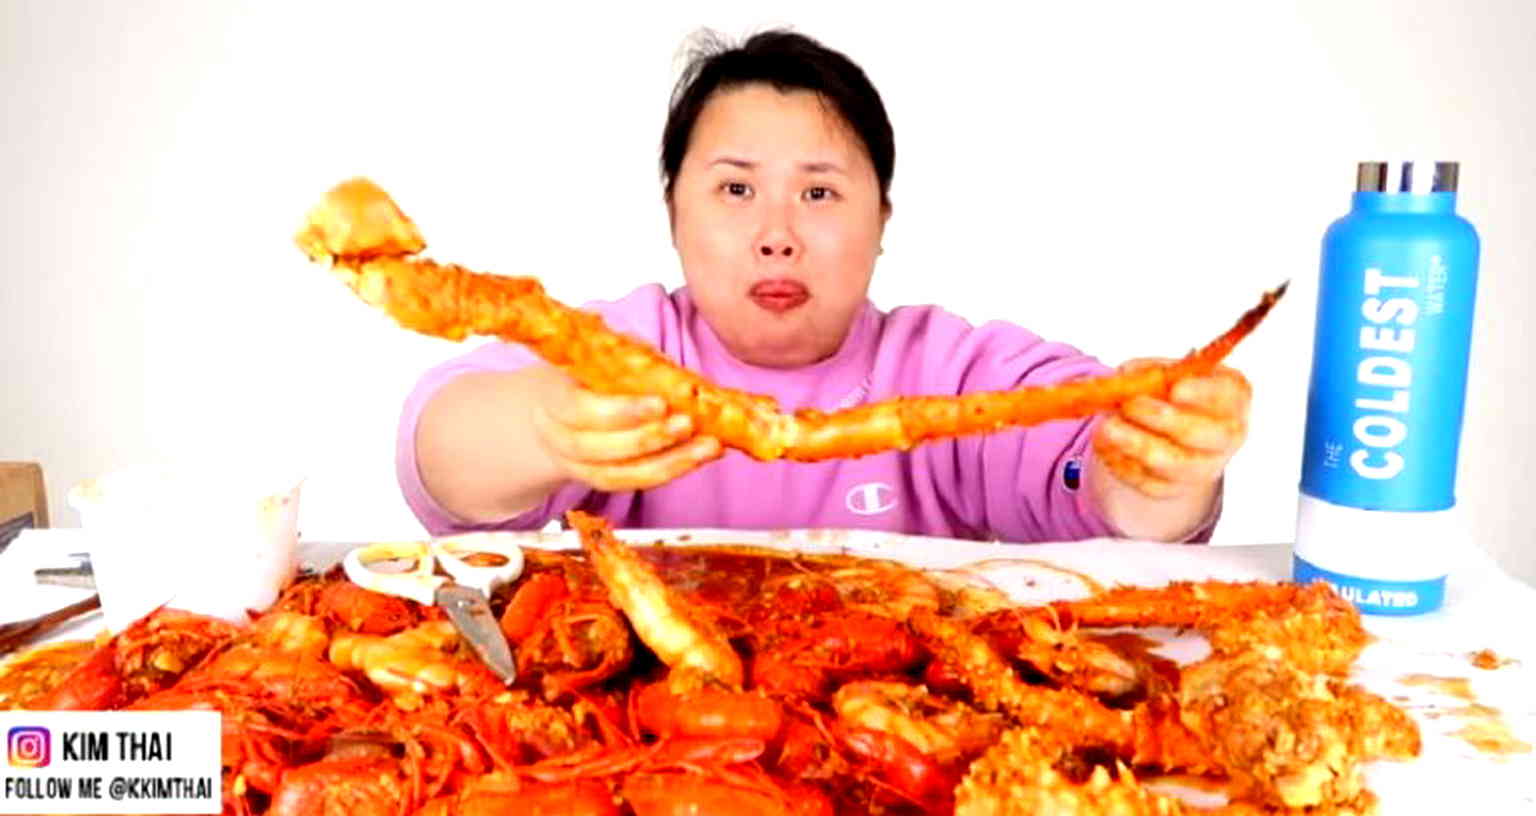 This 25-Year-Old YouTuber Made Over $100,000 in 8 Months By Eating Tons of Food